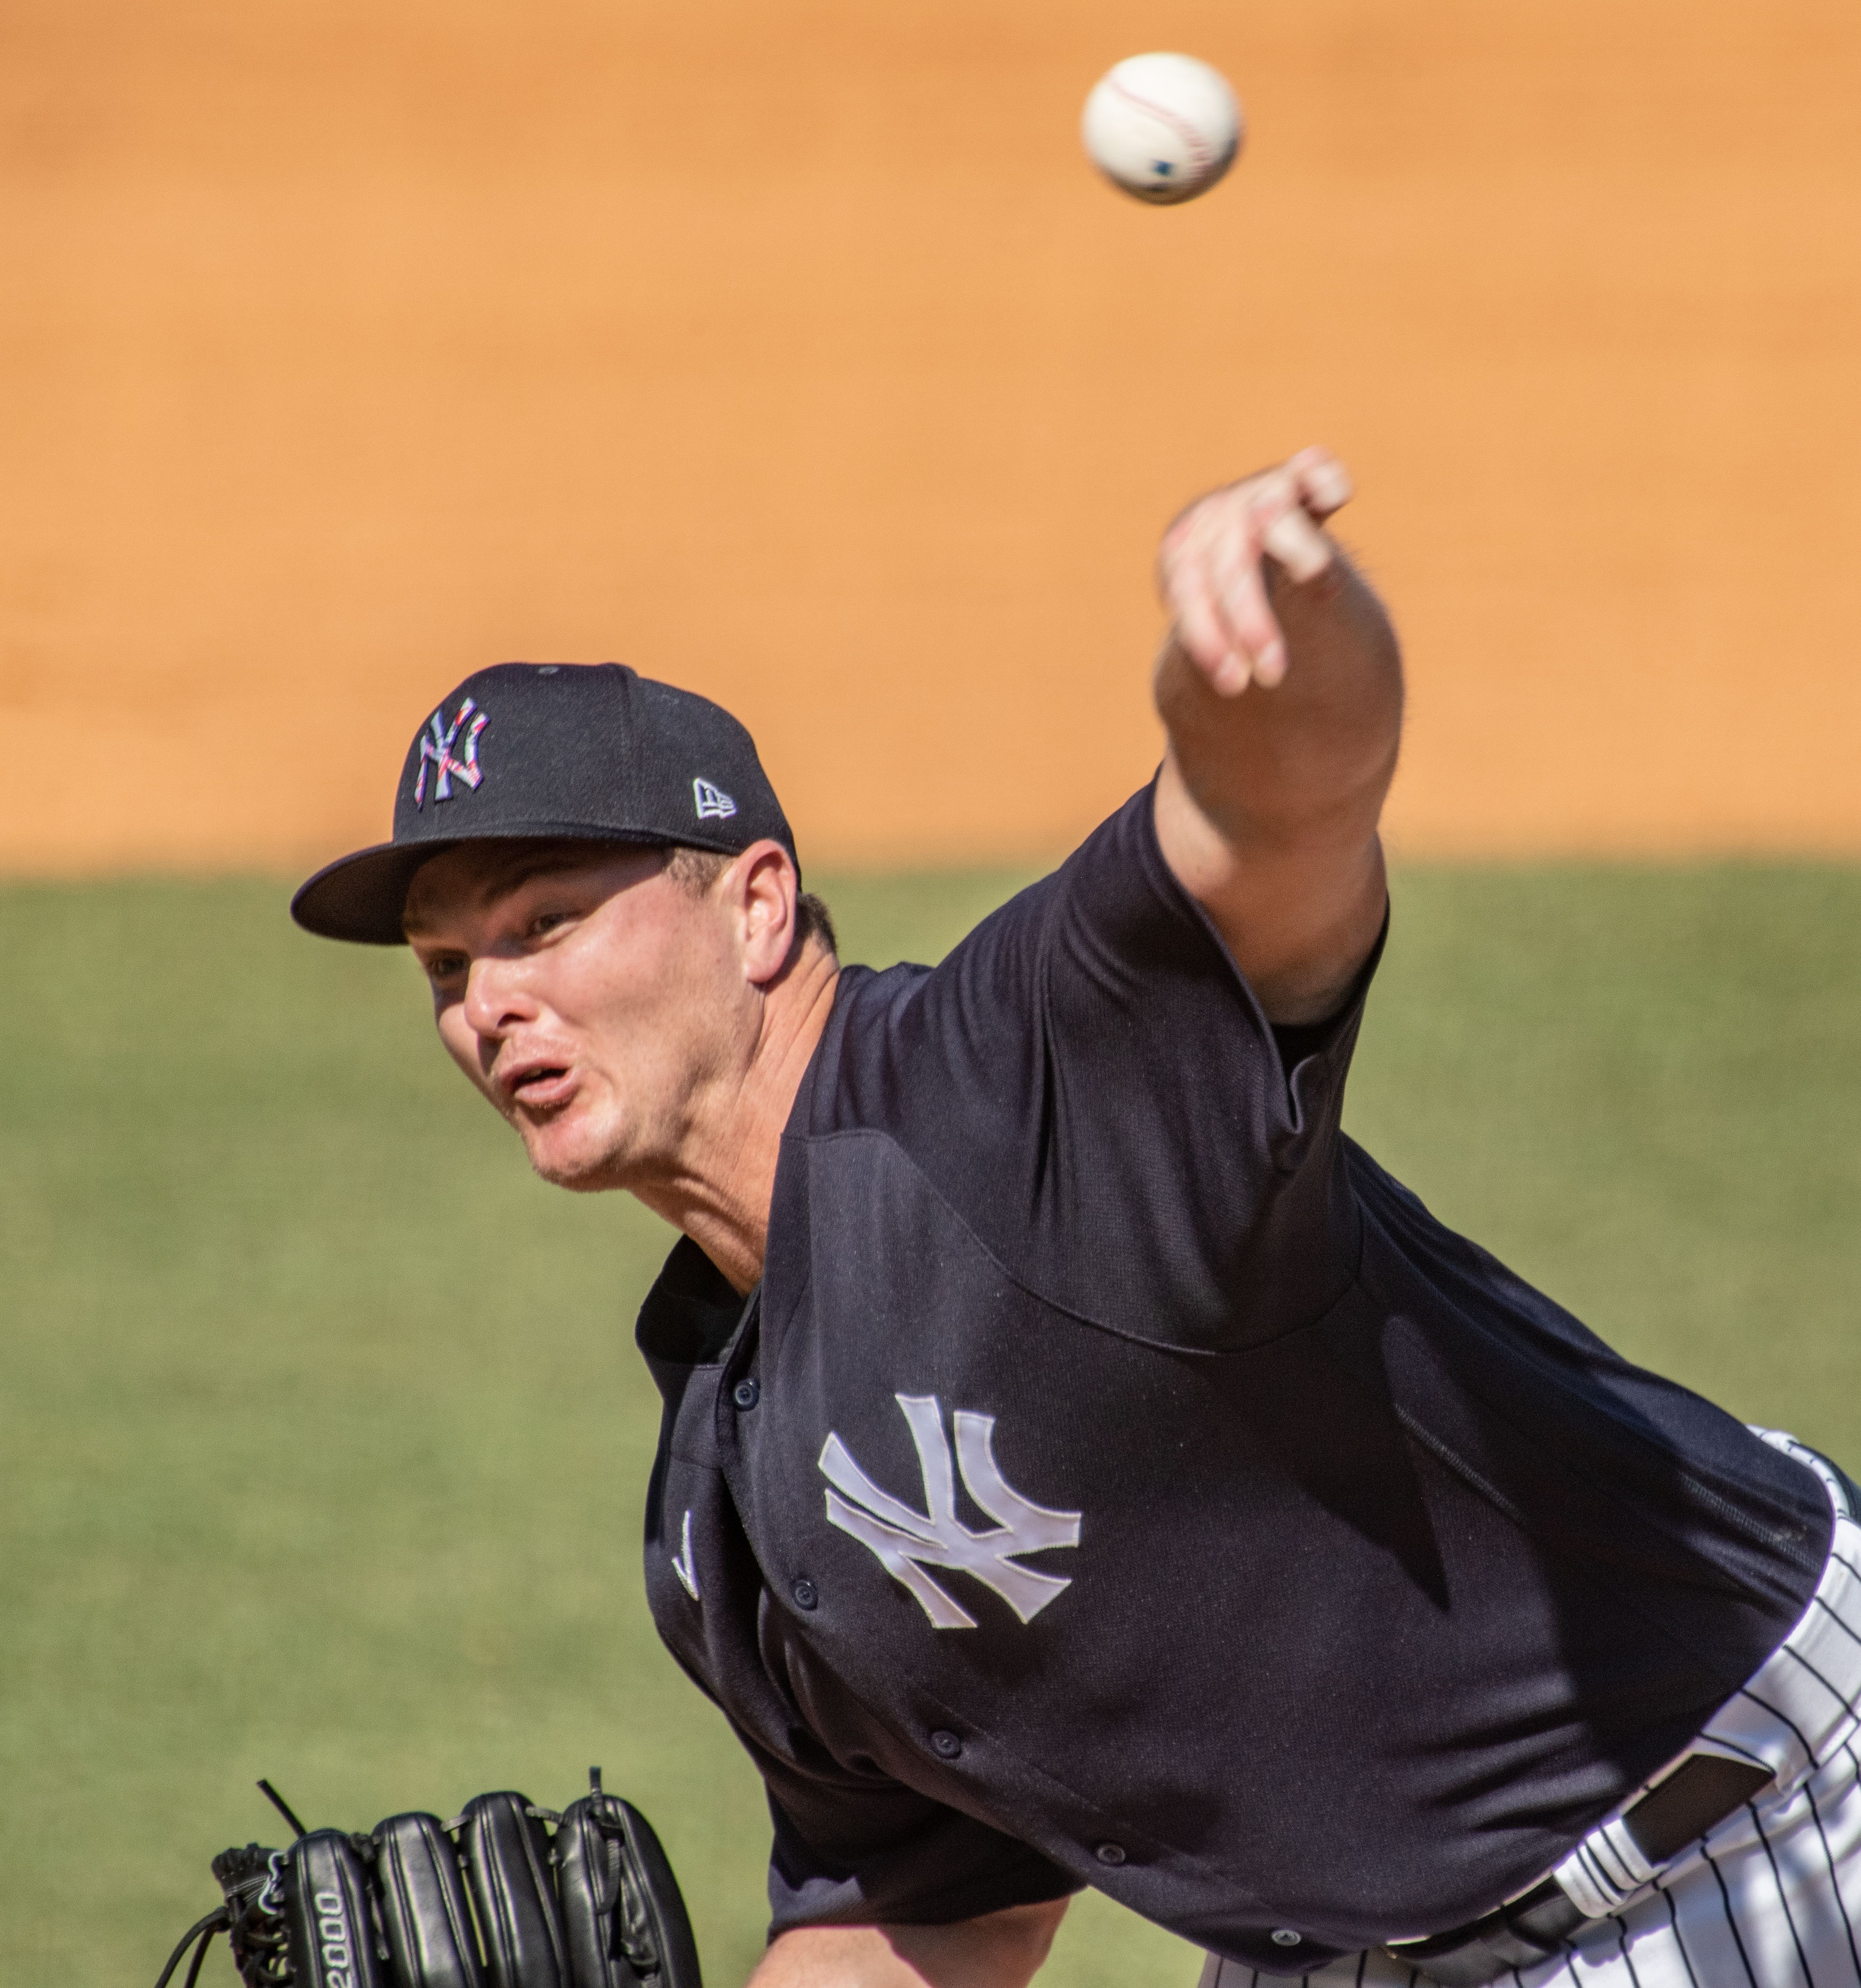 New York Yankees’ relief pitcher Justin Wilson throwing against the Pittsburgh Pirates in Tampa